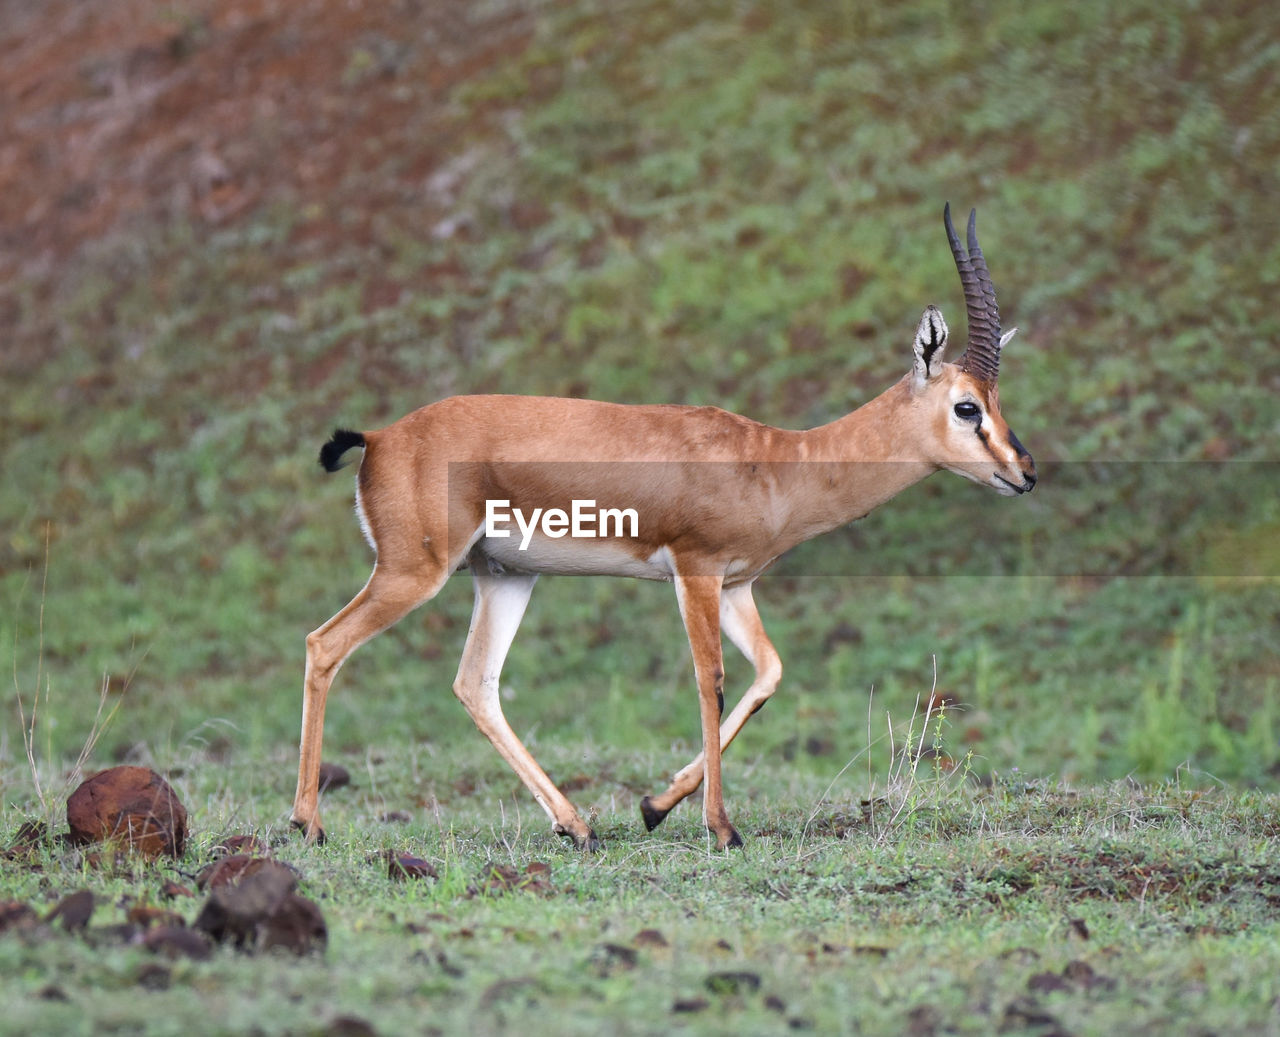 SIDE VIEW OF DEER ON GRASS